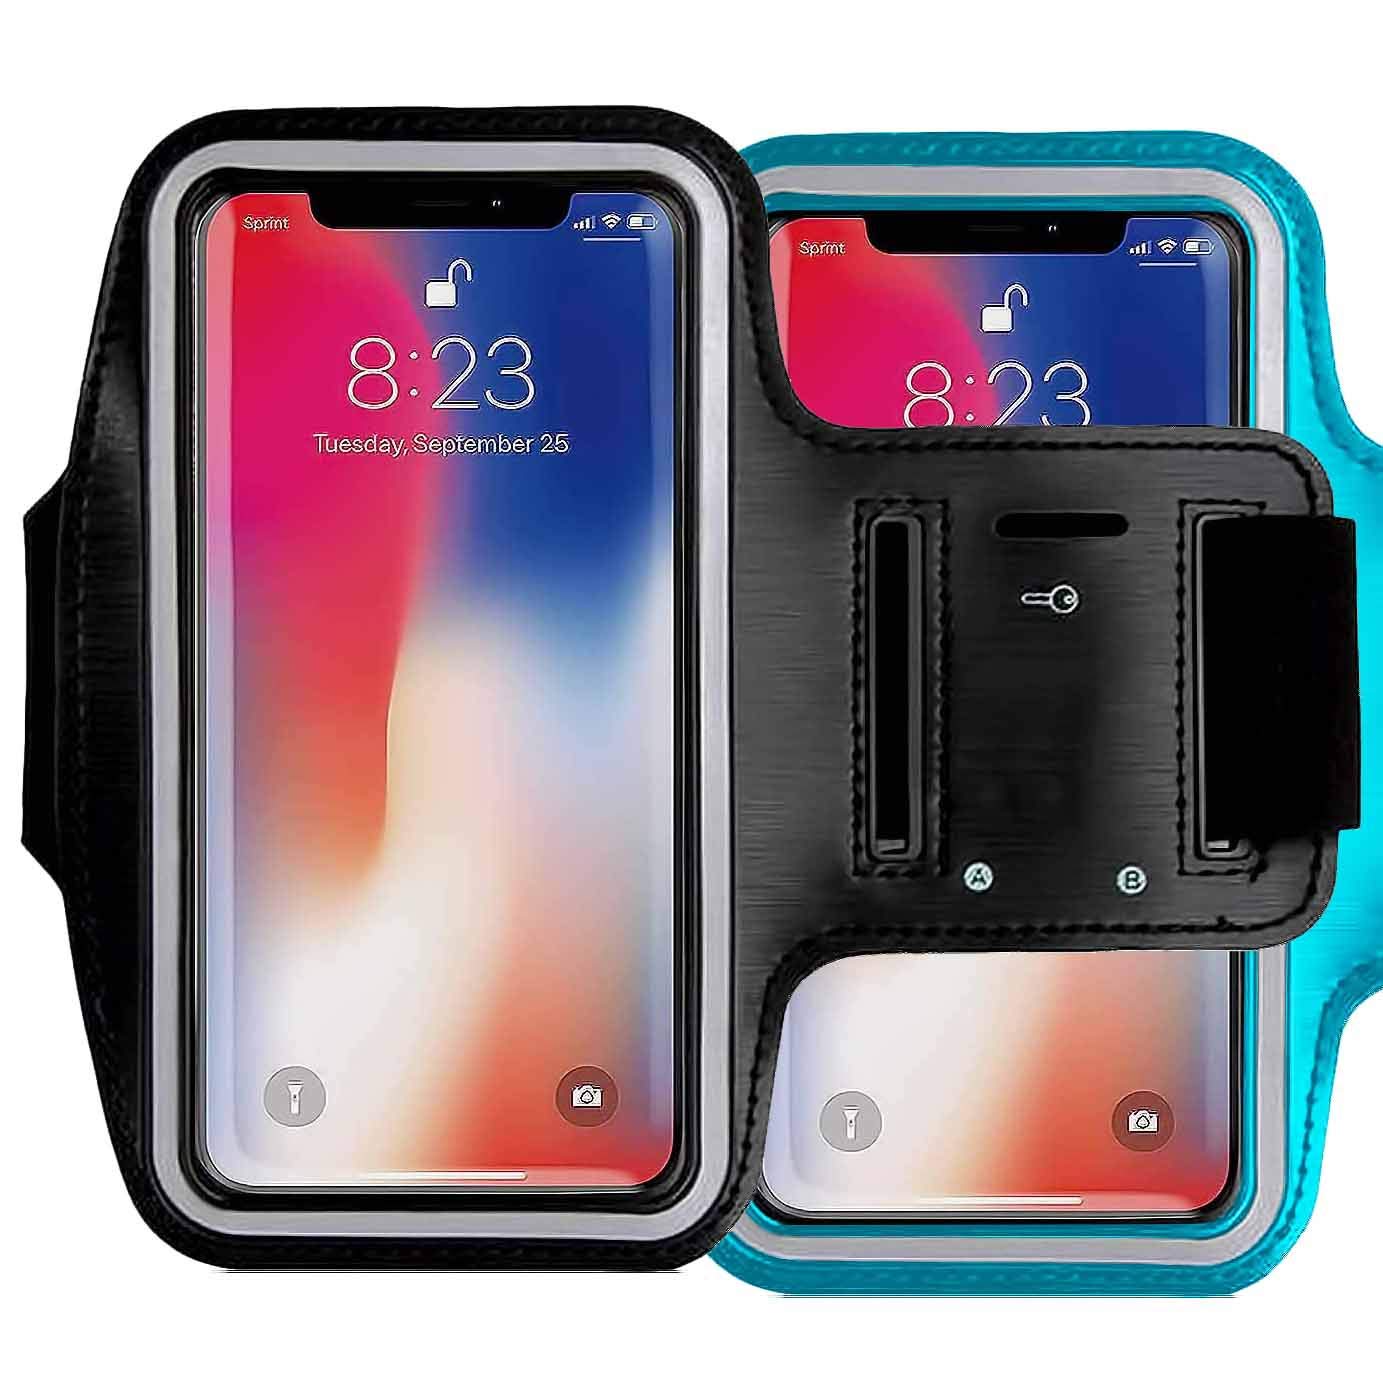 2Pack CaseHQ Water Resistant Cell Phone Armband Case Compatible with iPhone 12 iPhone 12 Mini iPhone 12 Pro Max iPhone 11, 11 Pro, 11 Pro Max, X, Xs Max, Xr, 8, 7, 6 Plus. Adjustable Band & Key Slot